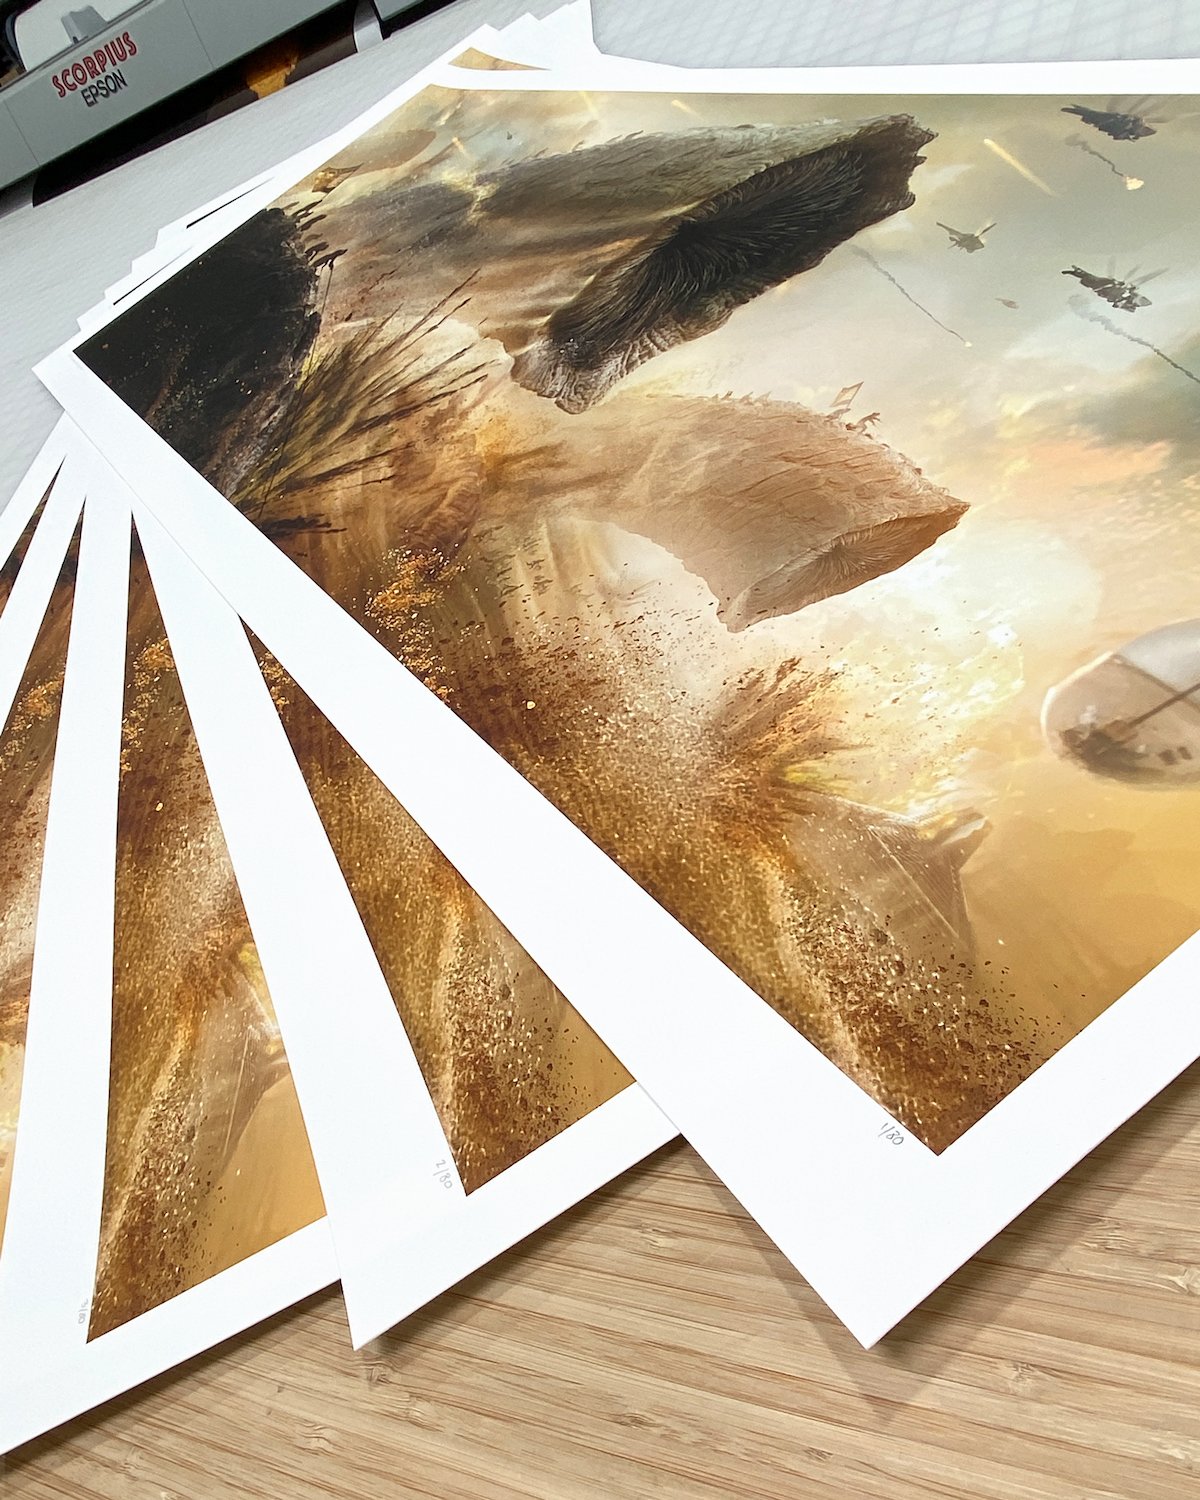 Multiple copies of Mutant's giant Dune: Part Two poster showing a Fremen sandworm attack piled on one another to show just one detail